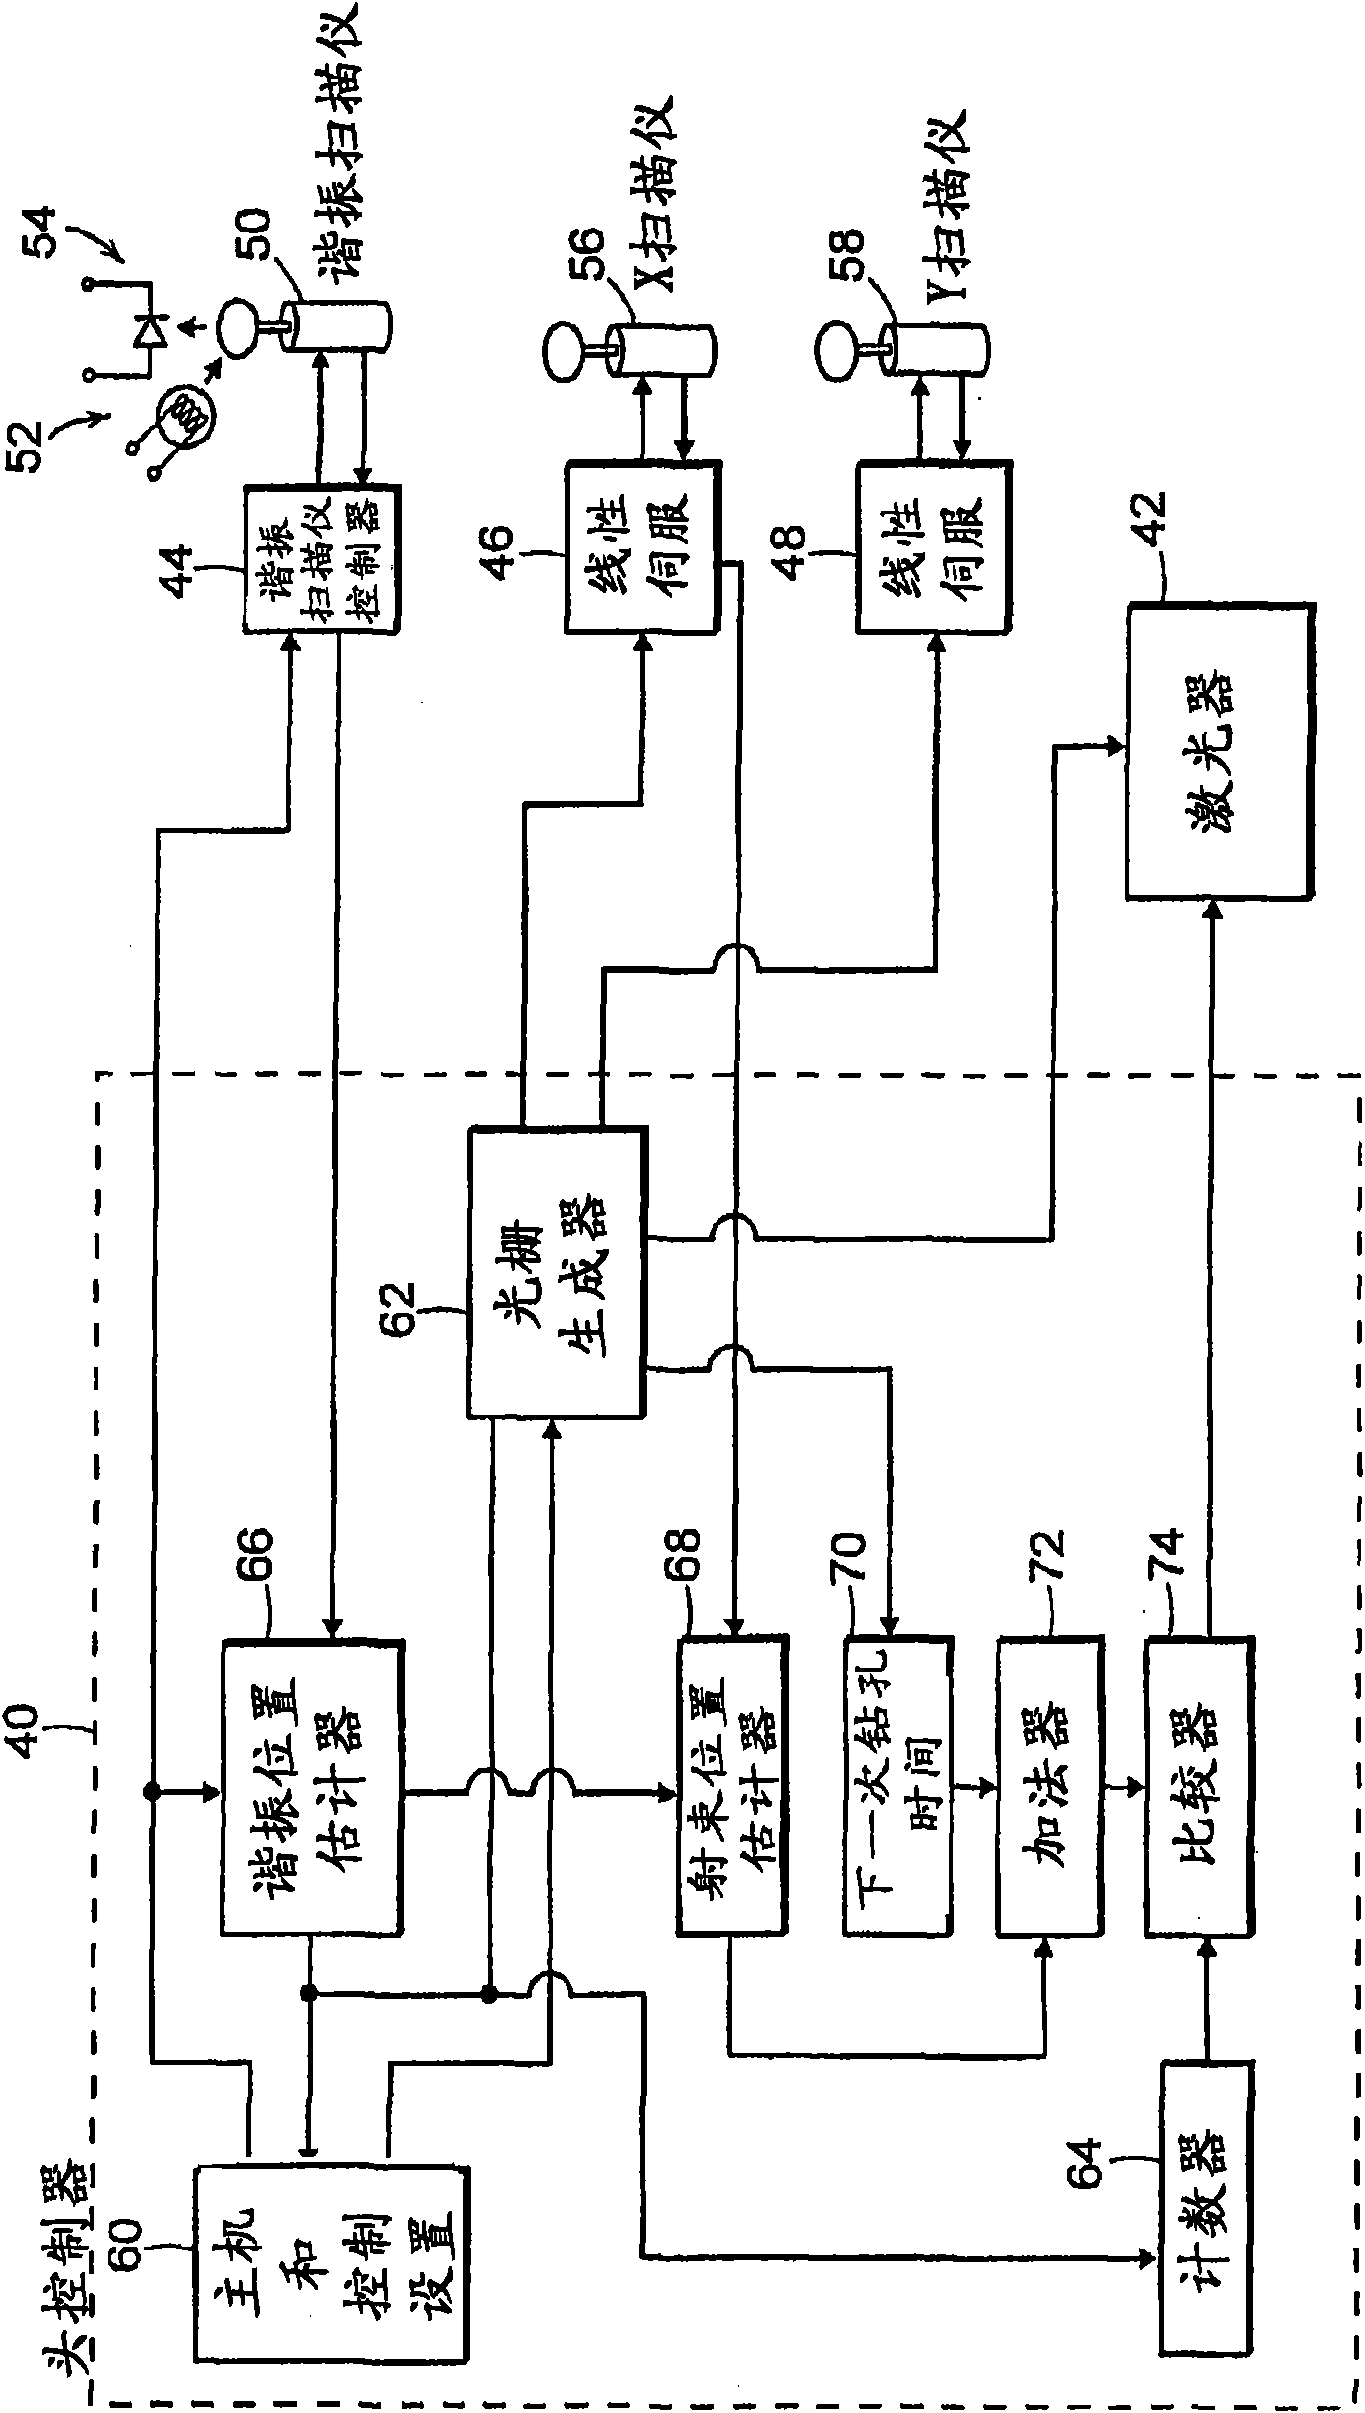 System and method for employing a resonant scanner in an X-Y high speed drilling system